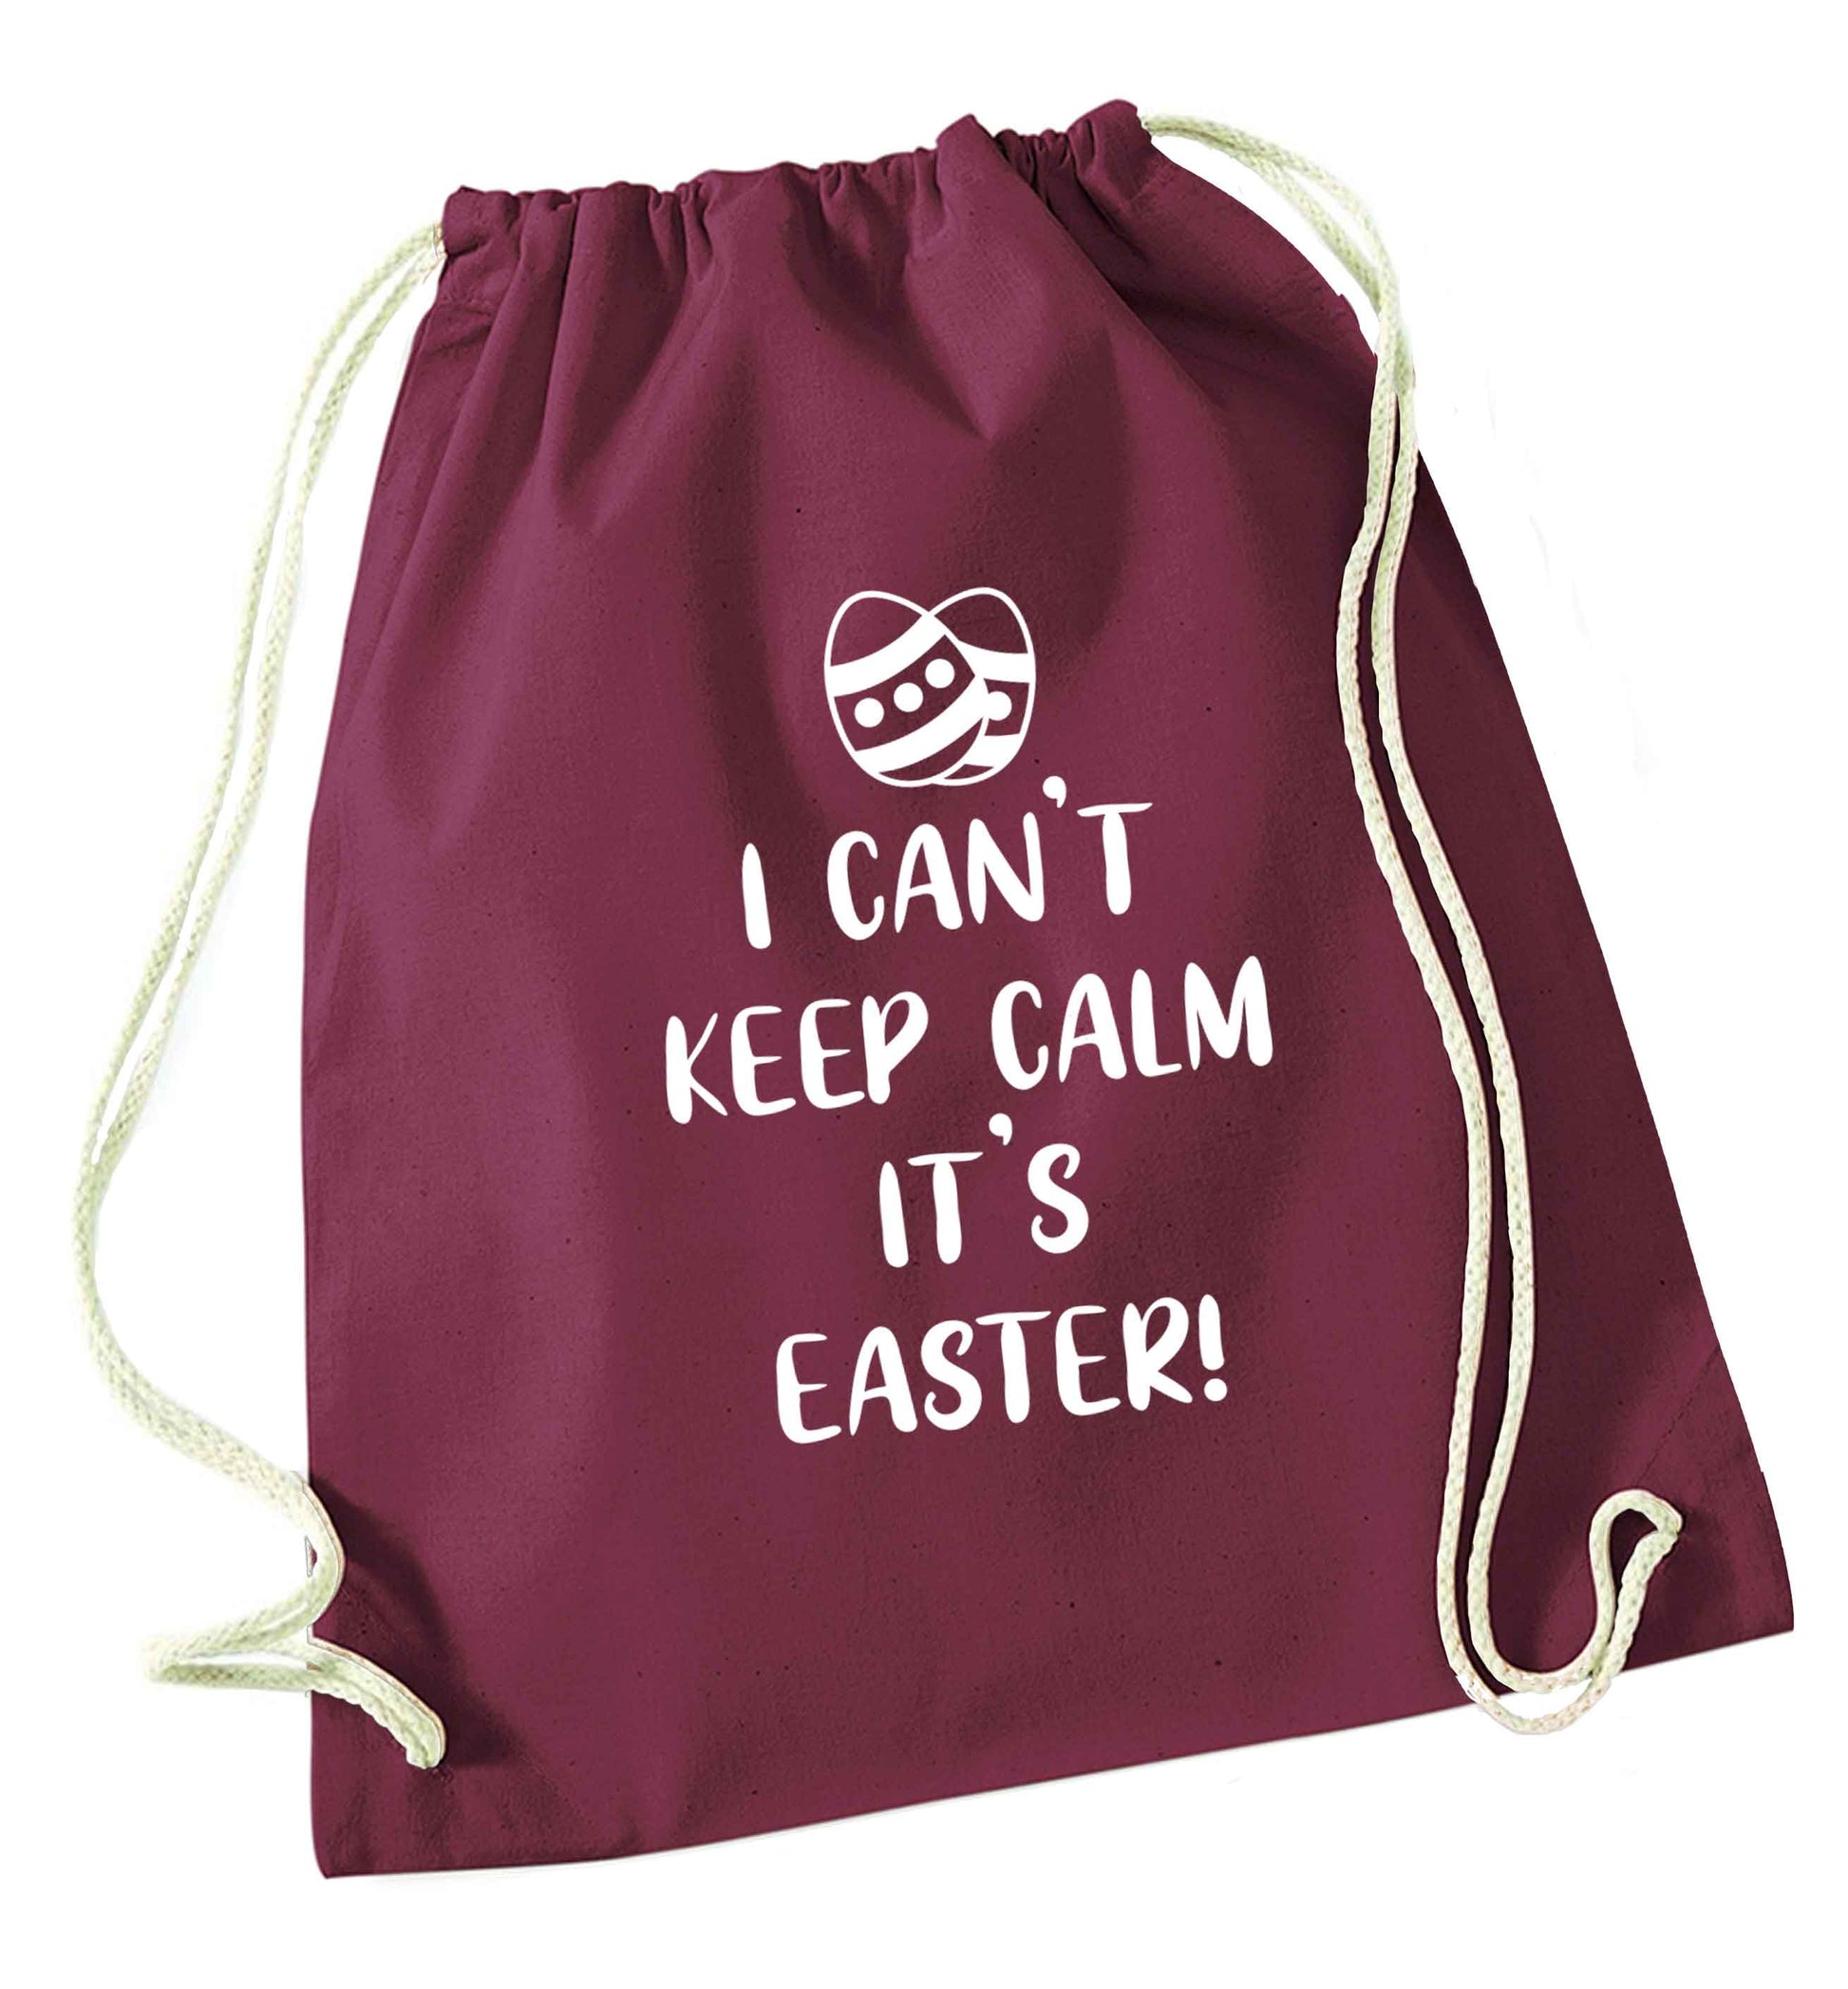 I can't keep calm it's Easter maroon drawstring bag